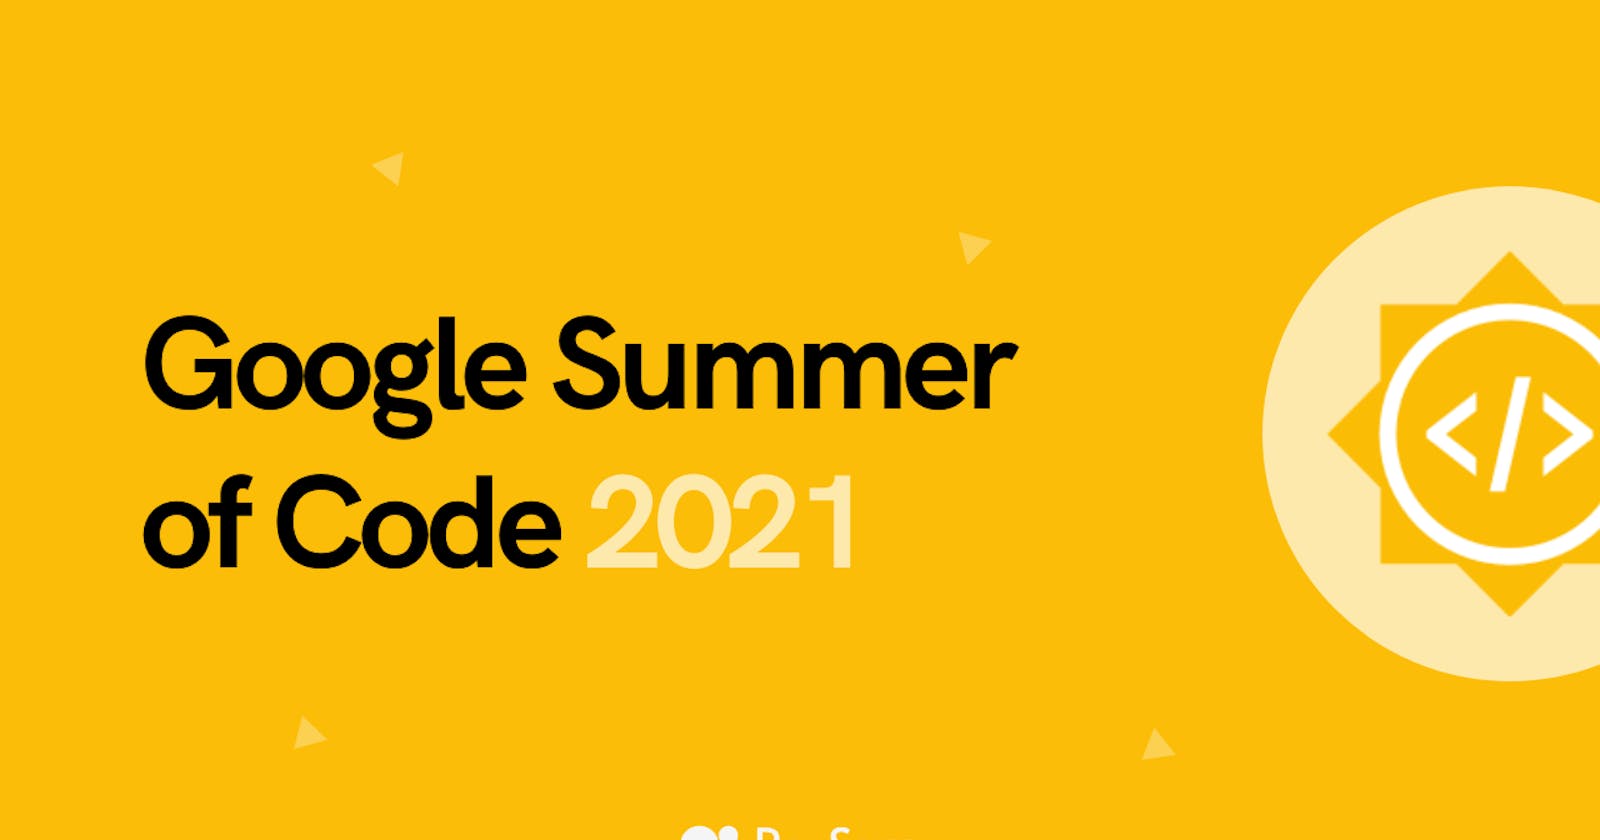 Two-minute read newsletter to help Google Summer of Code aspirants